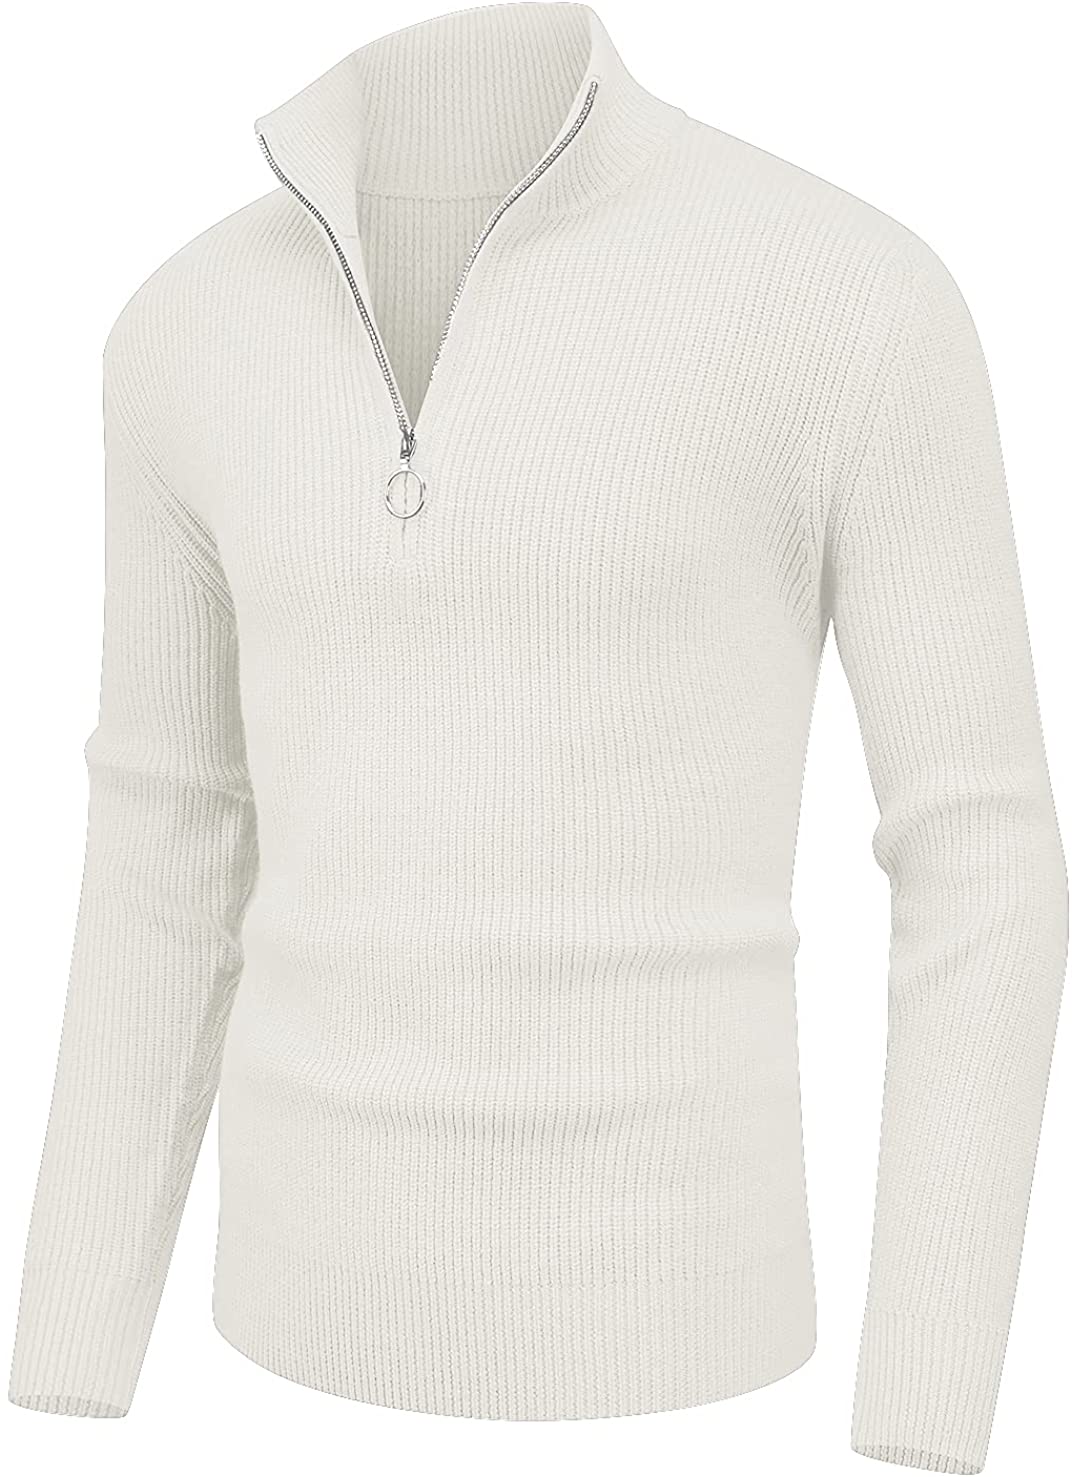 Sailwind Men's Soft Sweaters Quarter Zip Pullover Classic Ribbed ...